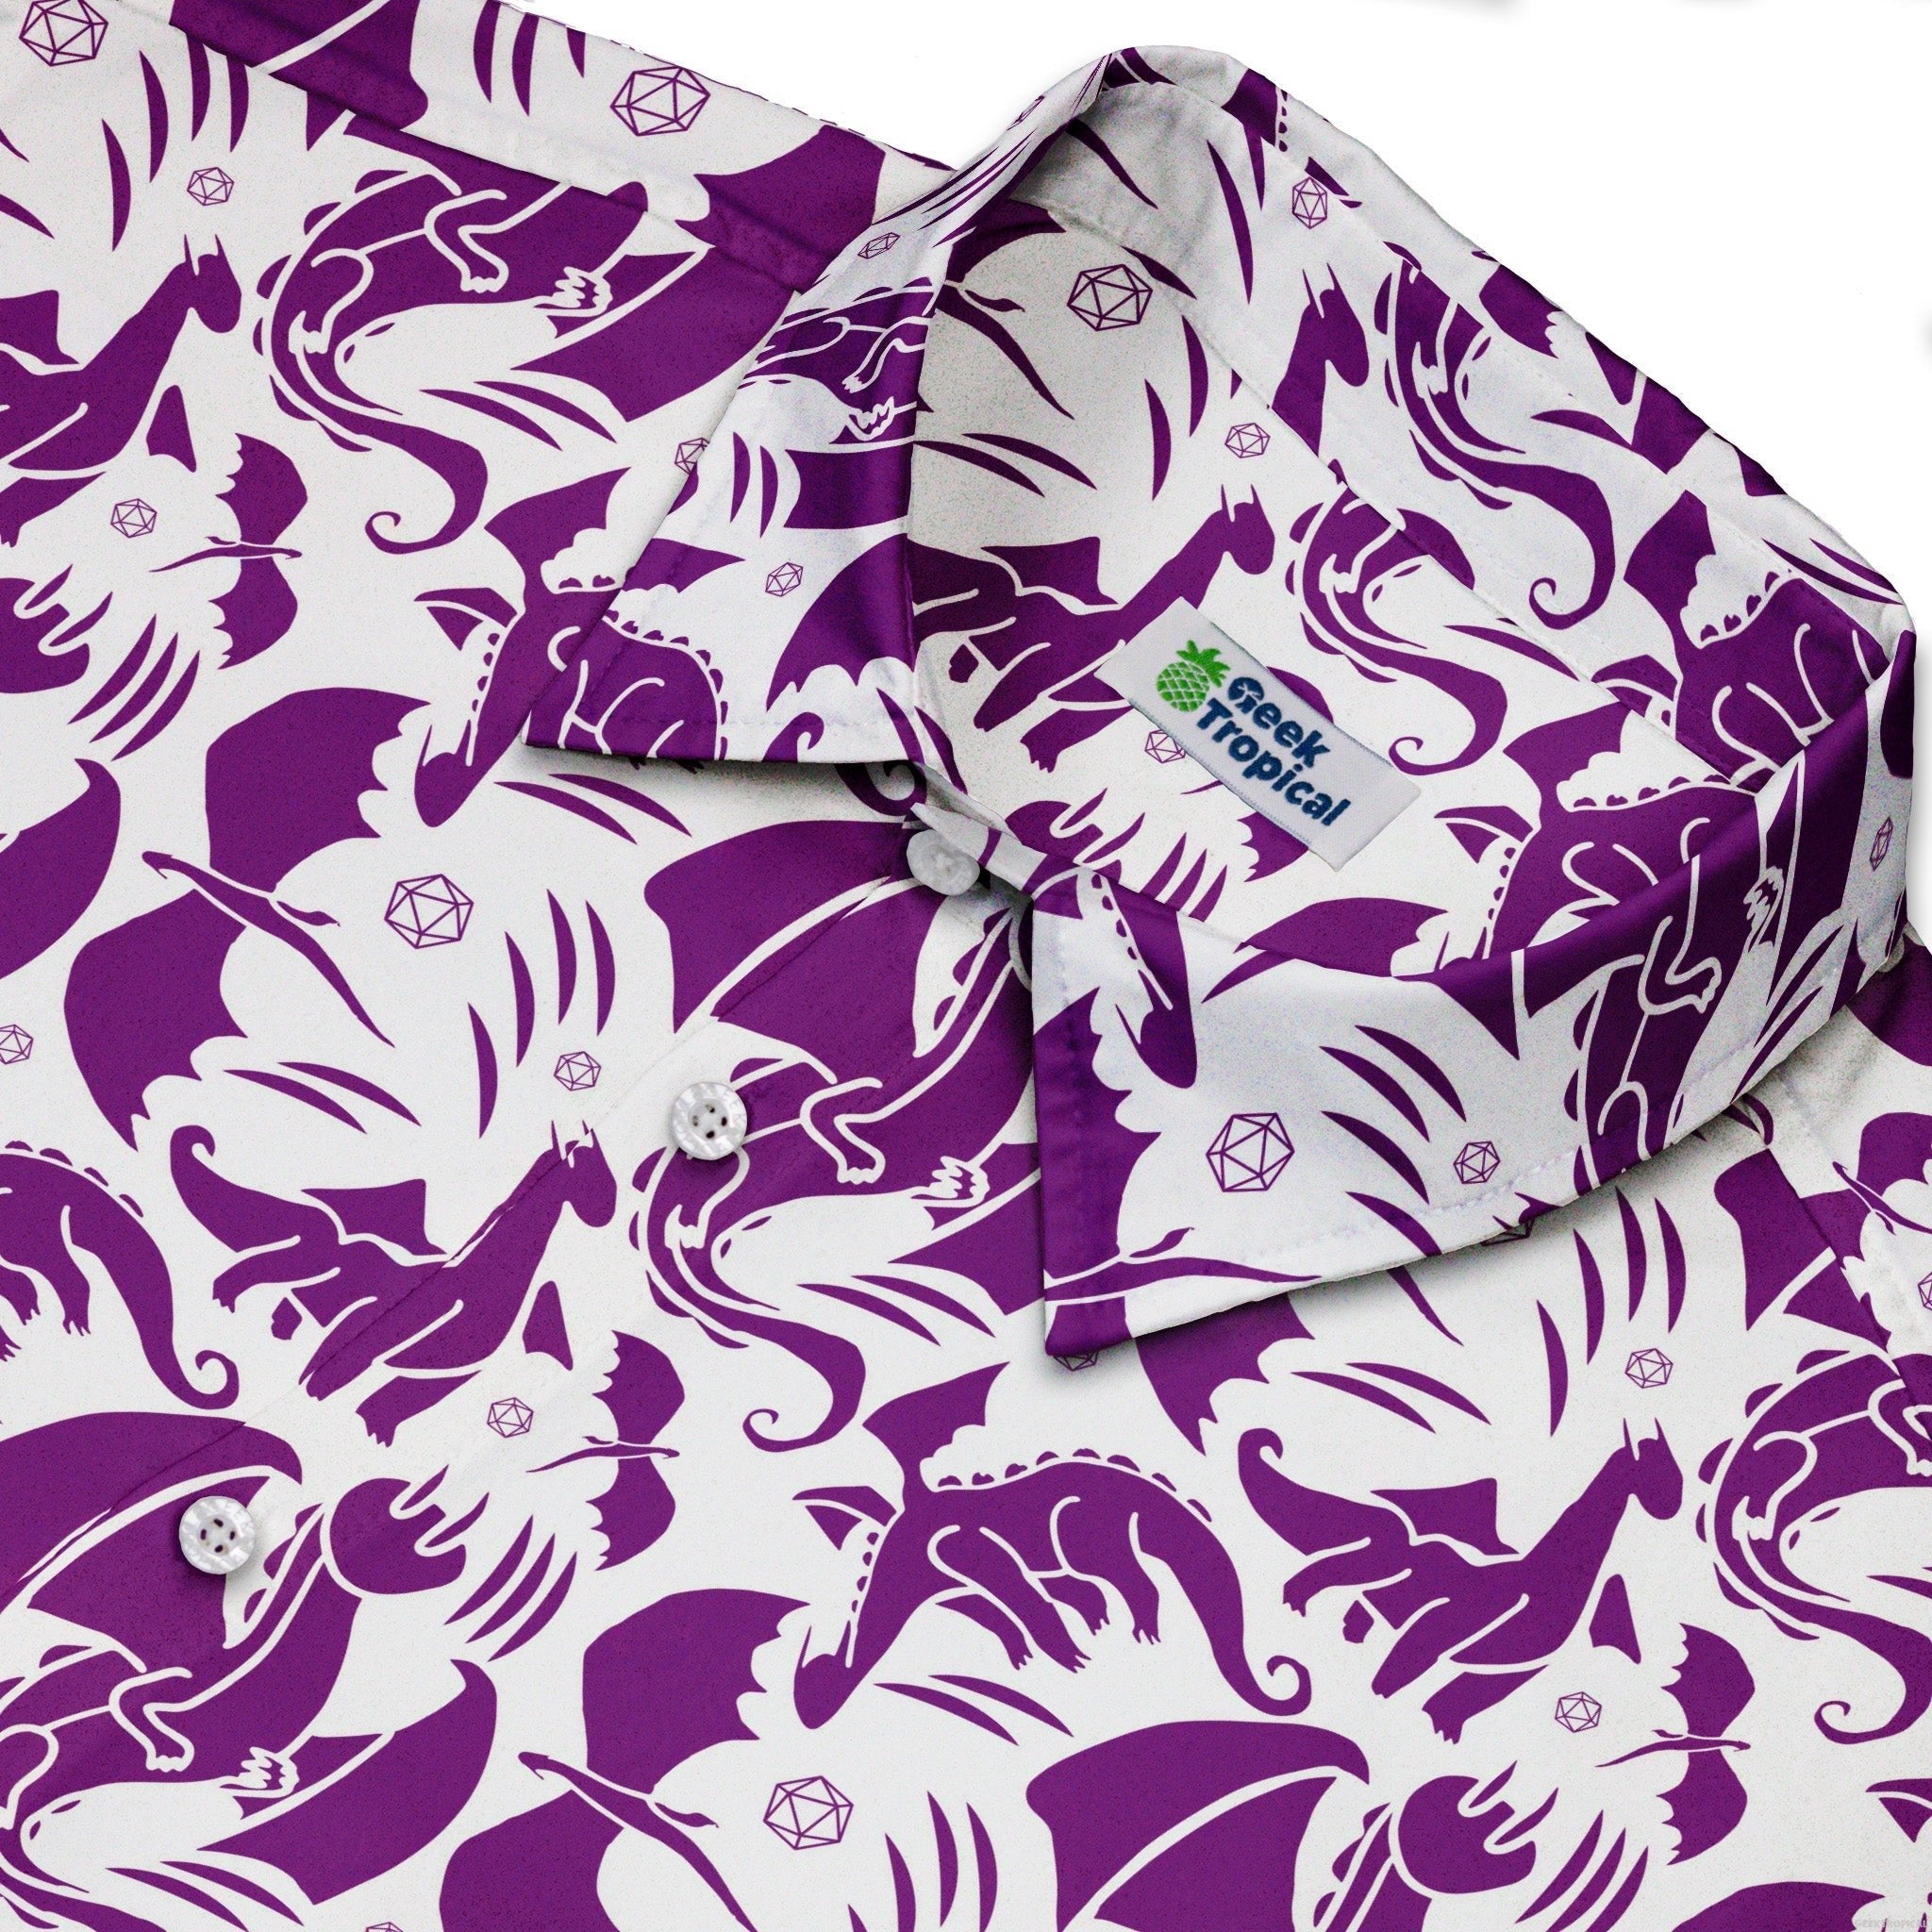 Dnd Purple Dragons Button Up Shirt - adult sizing - Design by Heather Davenport - dnd & rpg print